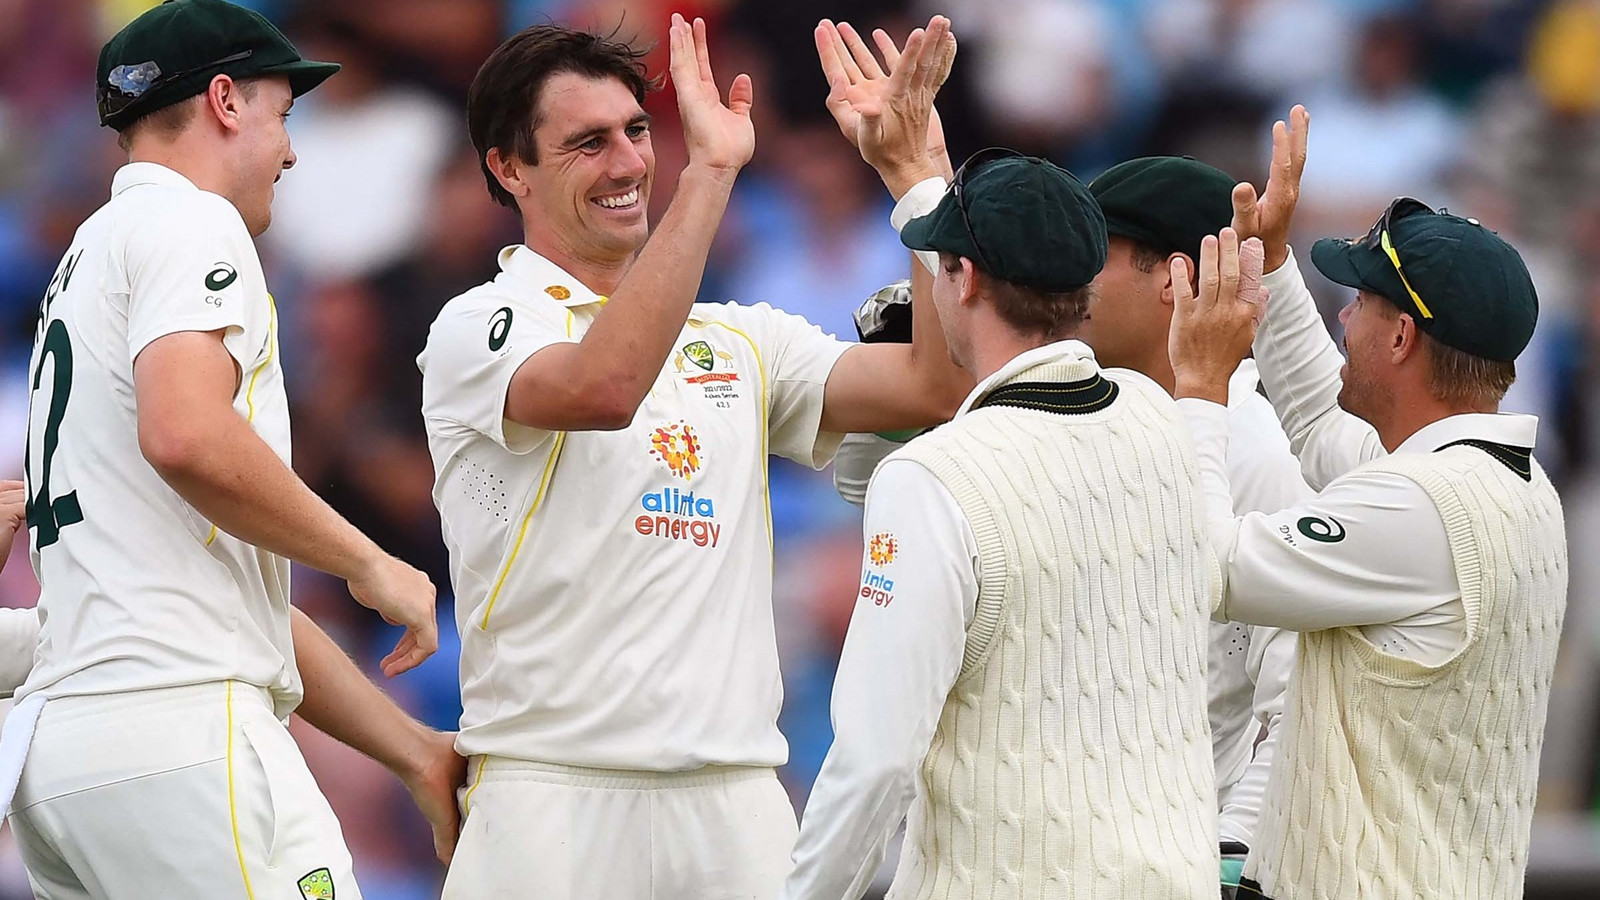 Australia cements their spot as the no.1 ranked Test team in latest ICC rankings update